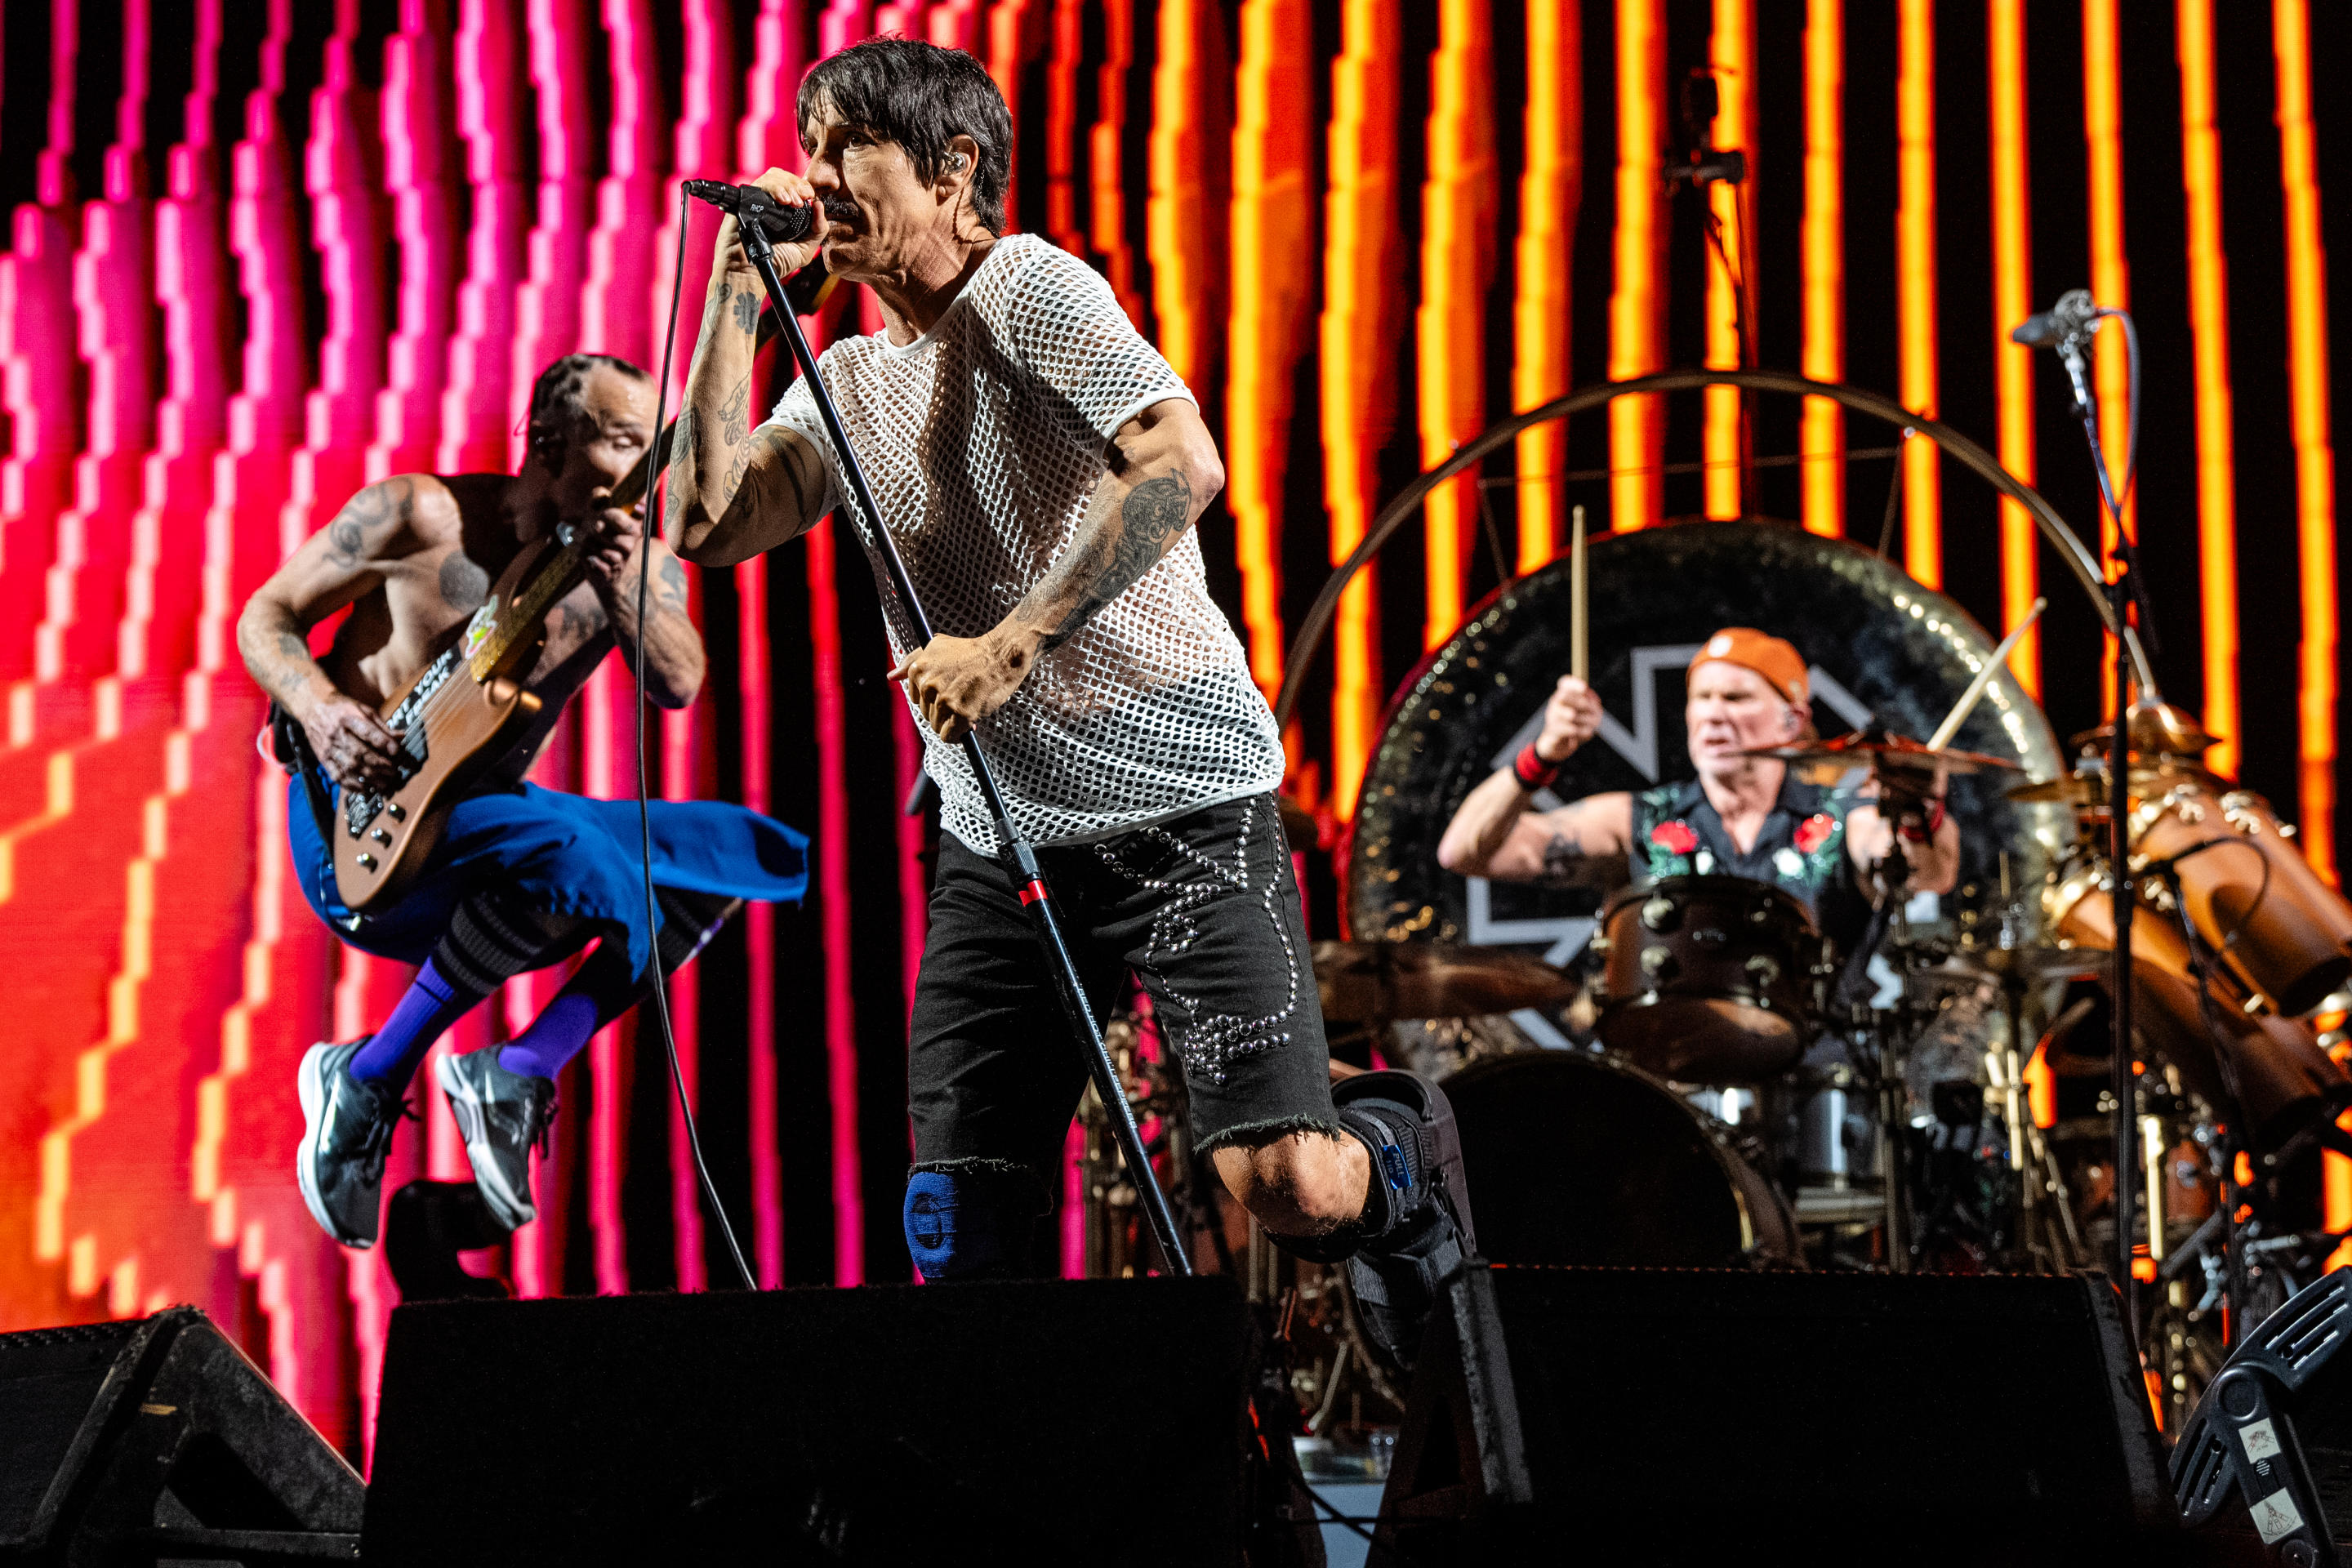 The Red Hot Chili Peppers performs at Lollapalooza last year.